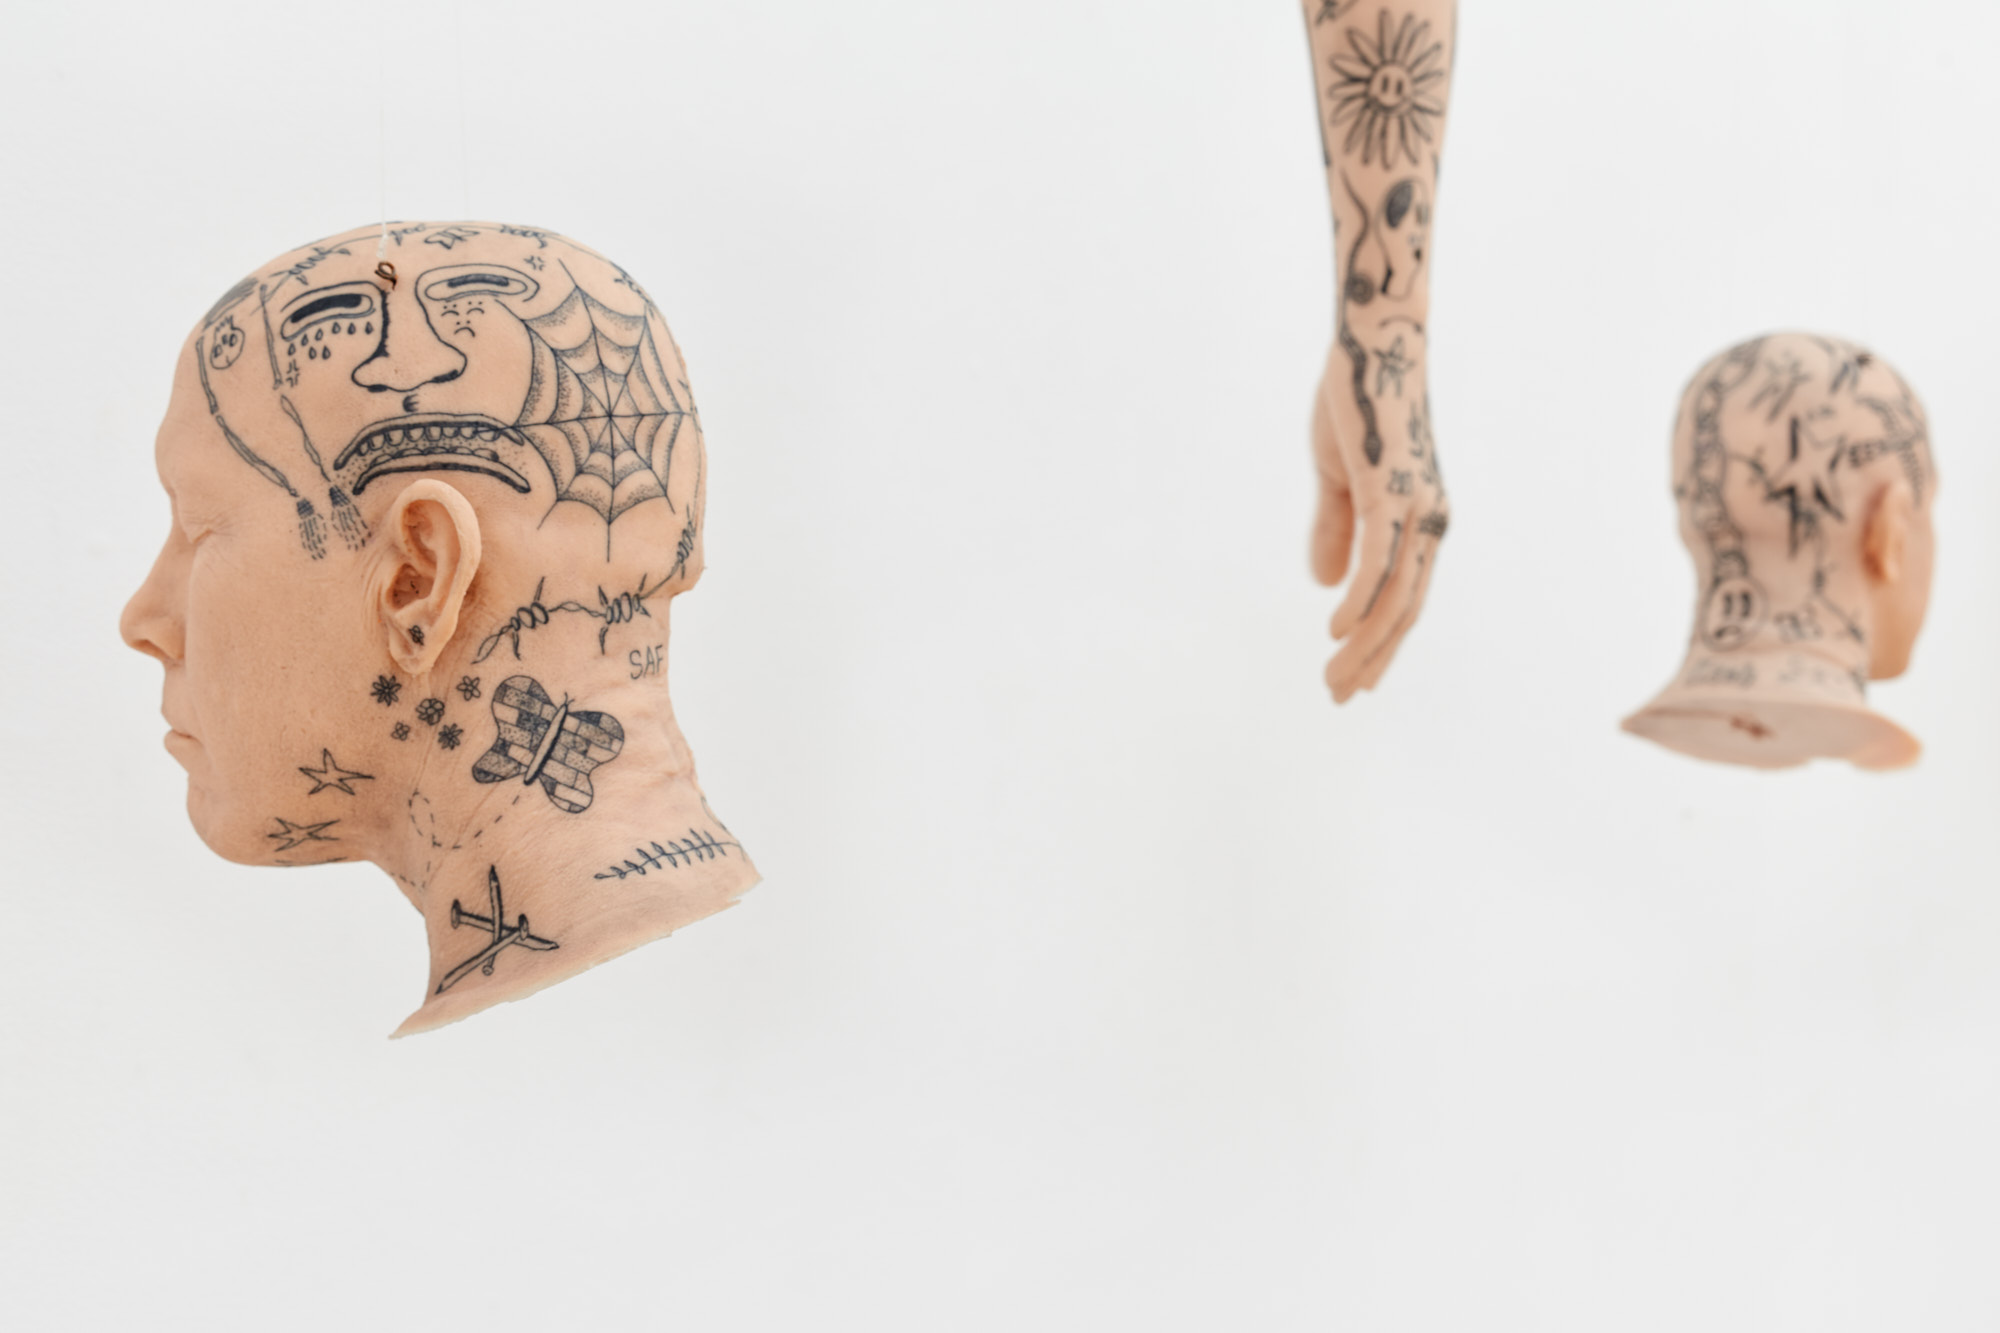 Exhibition Tales and Whispers 2019. SVA Flatiron Gallery, New York. Detail of artwork by Gregory Coscia. Two flesh colored sculptures of heads with tattoos and a flesh colored arm with tattoos.